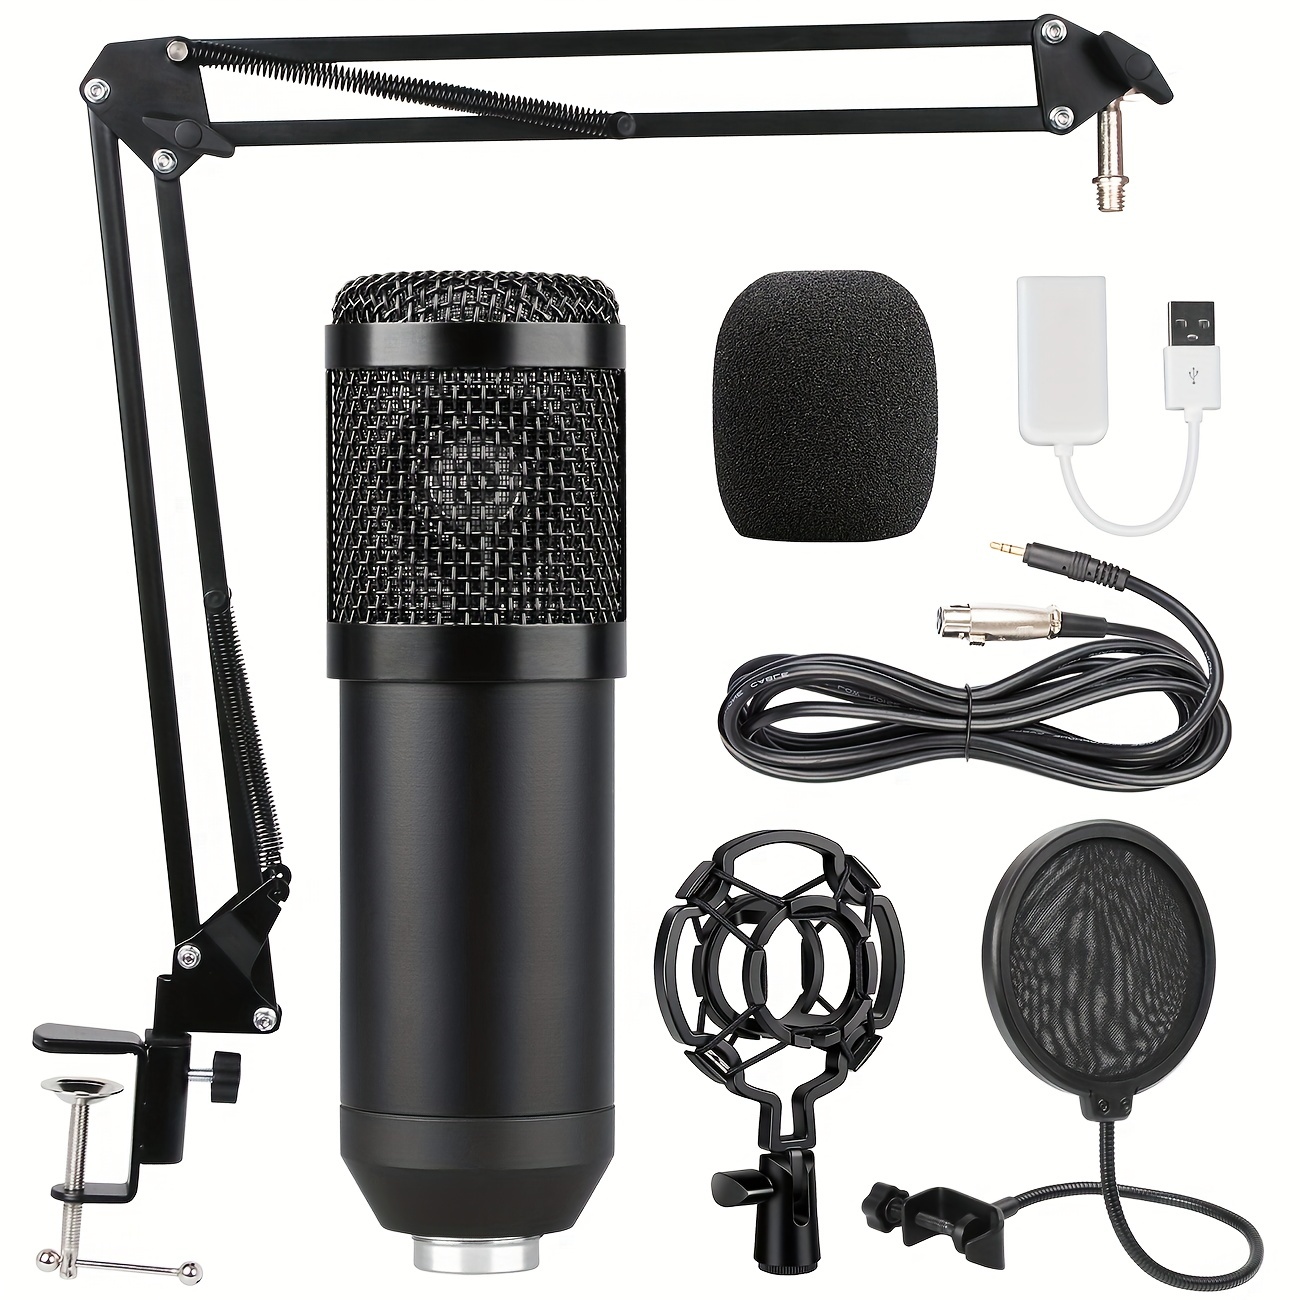 Upgraded USB Conference Microphone for Computer, 360° Omnidirectional  Condenser Mic with Mute Key, Great for Video Conference, Gaming, Chatting